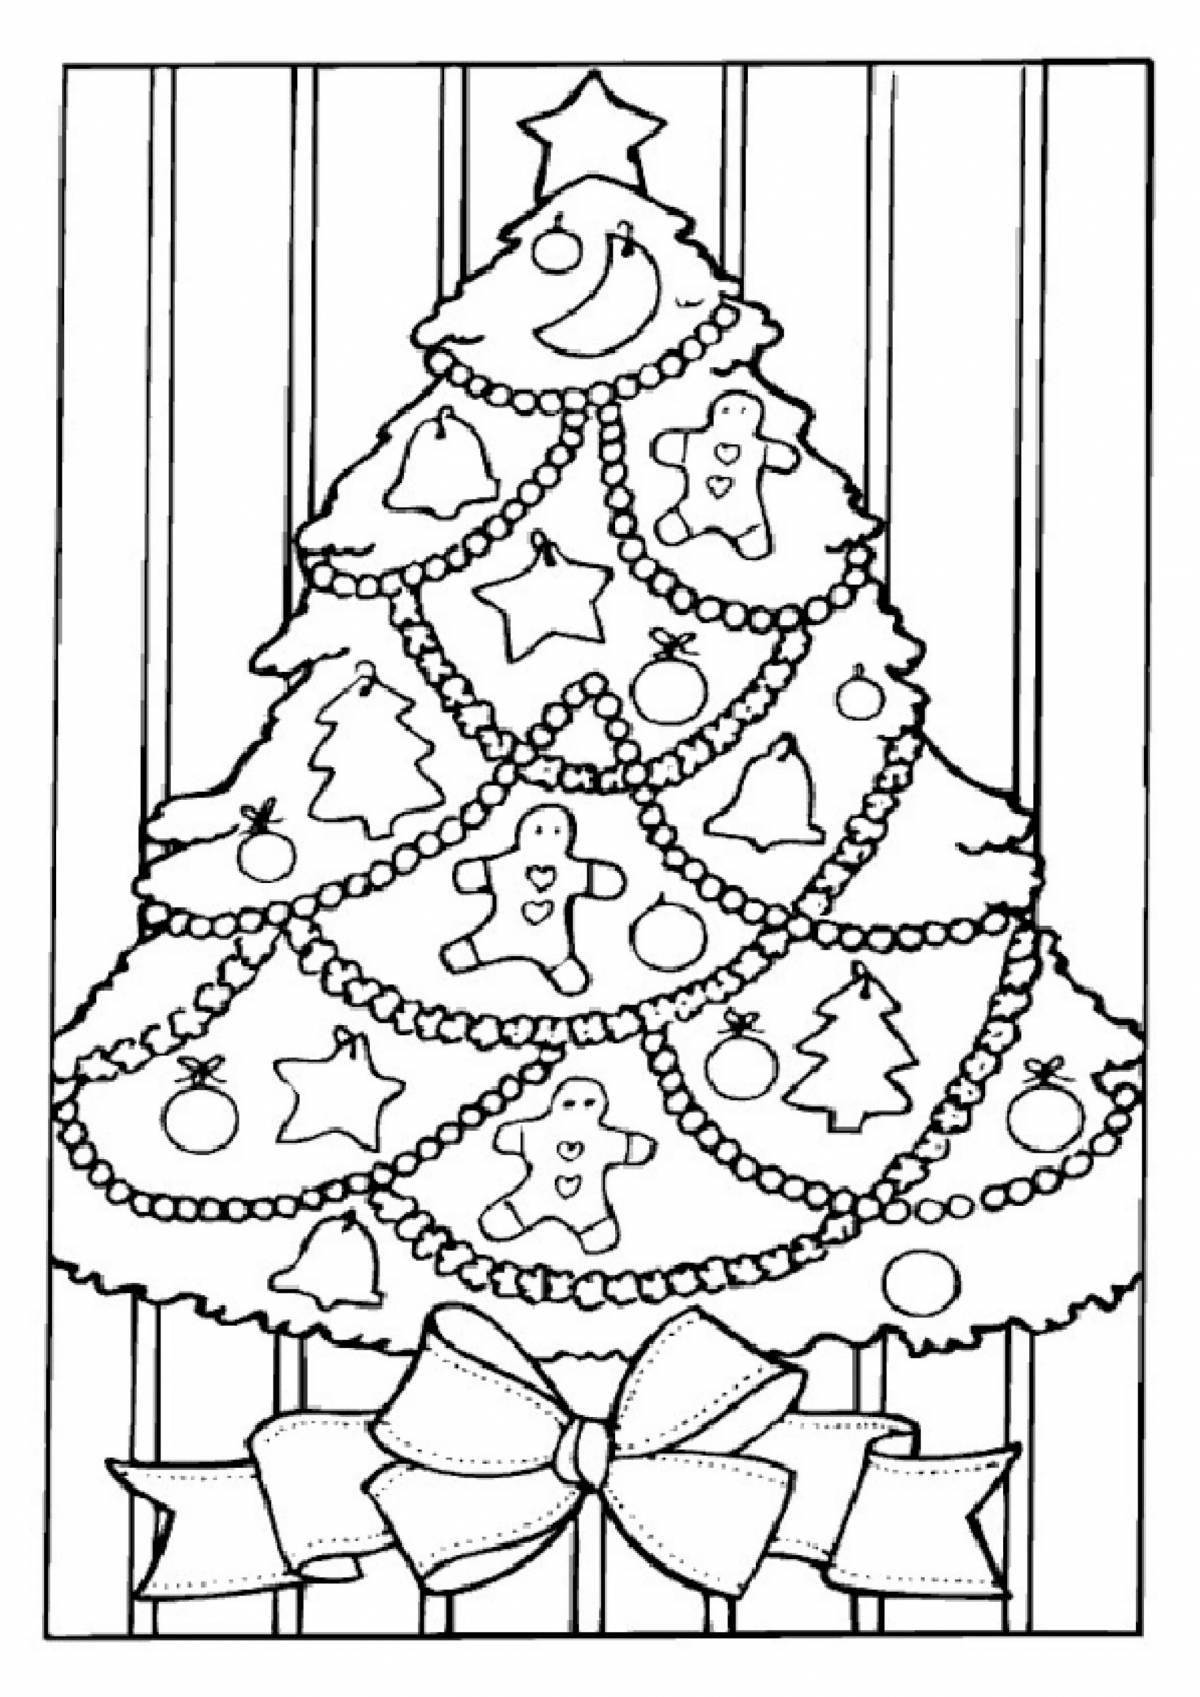 Gorgeous drawing of a Christmas tree